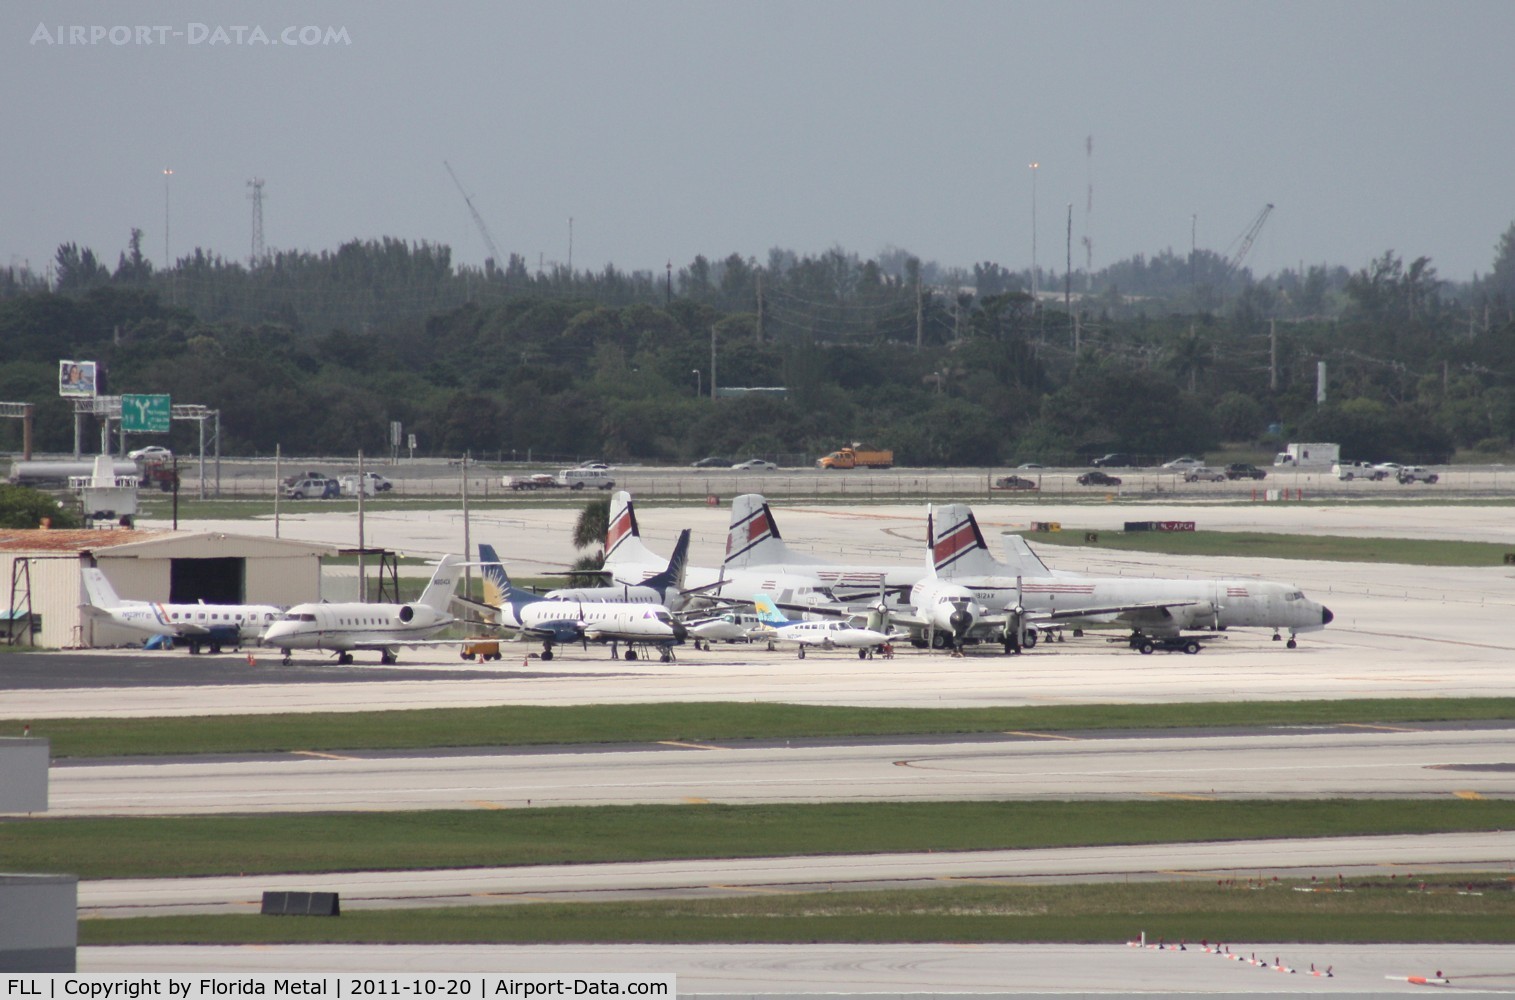 Fort Lauderdale/hollywood International Airport (FLL) - Looking west from the spotting area on top of the garage